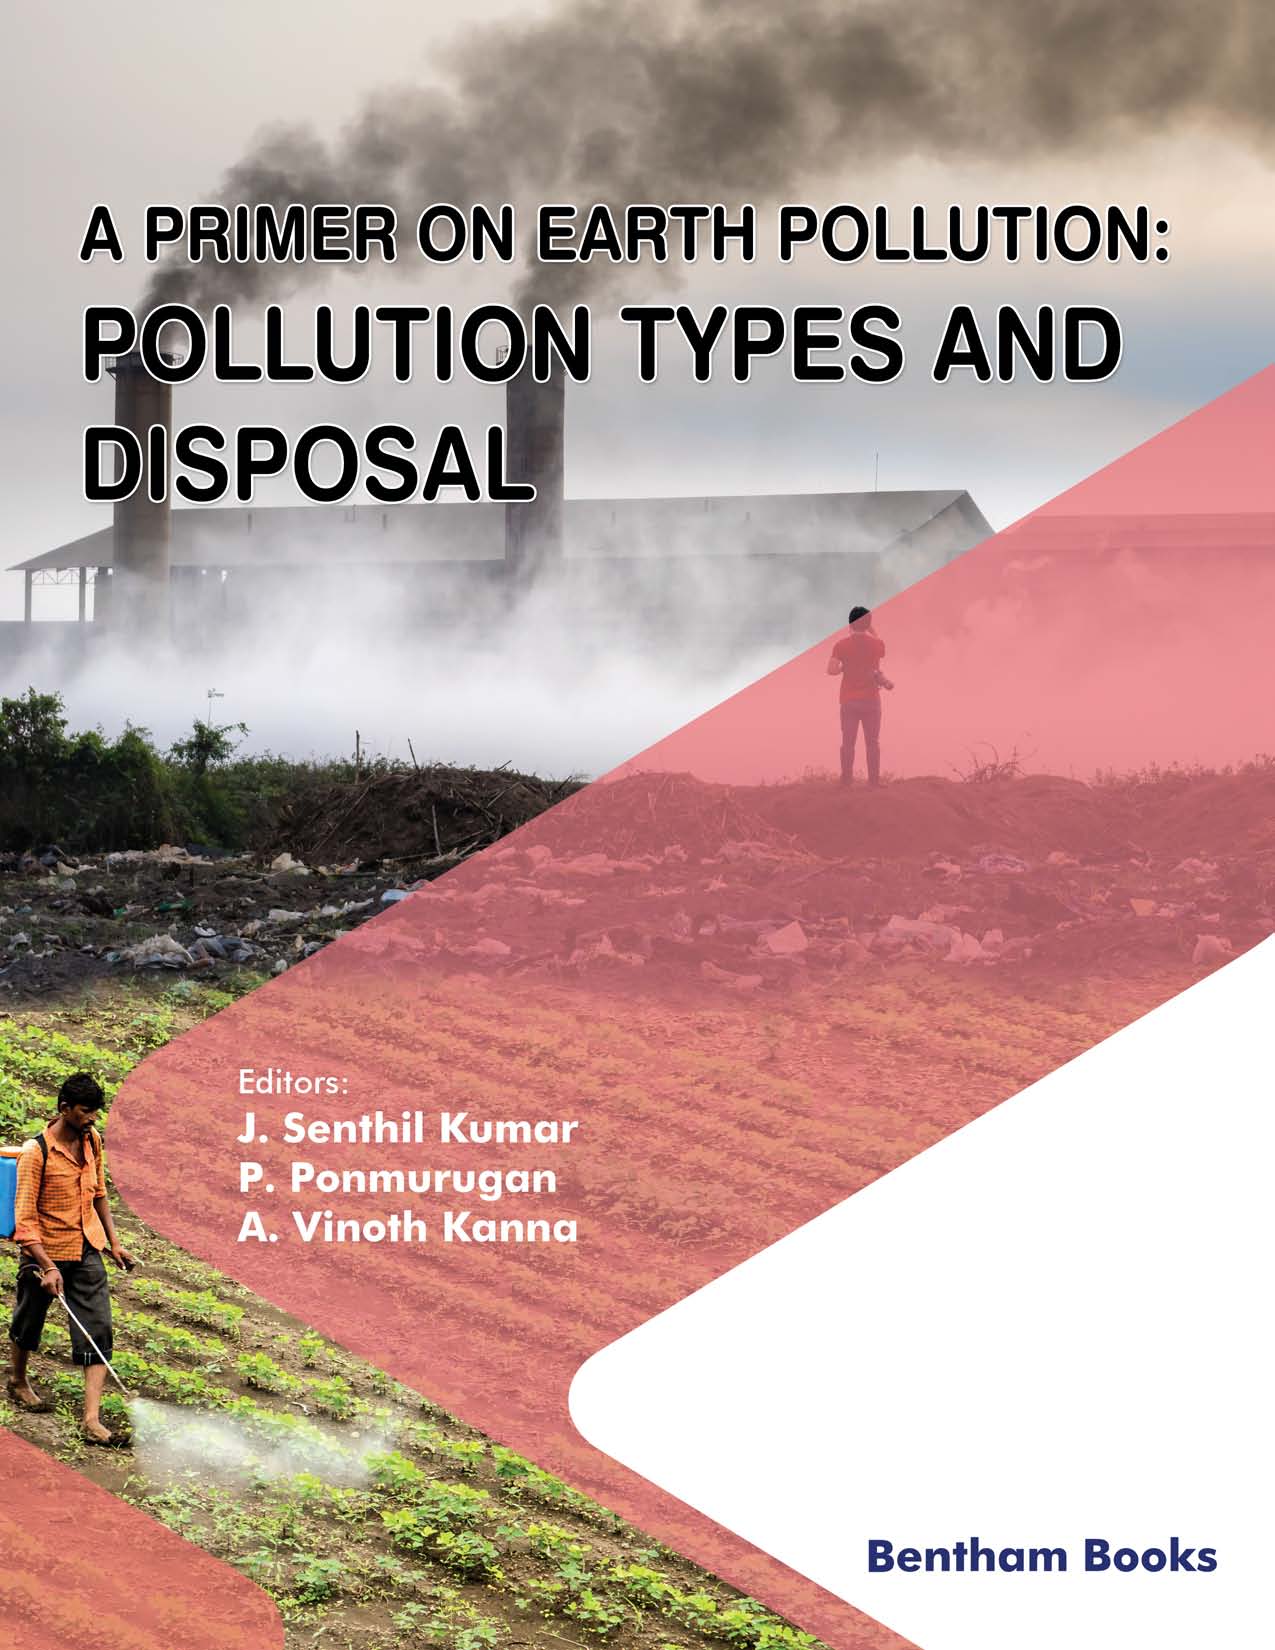 A Primer on Earth Pollution: Pollution Types and Disposal